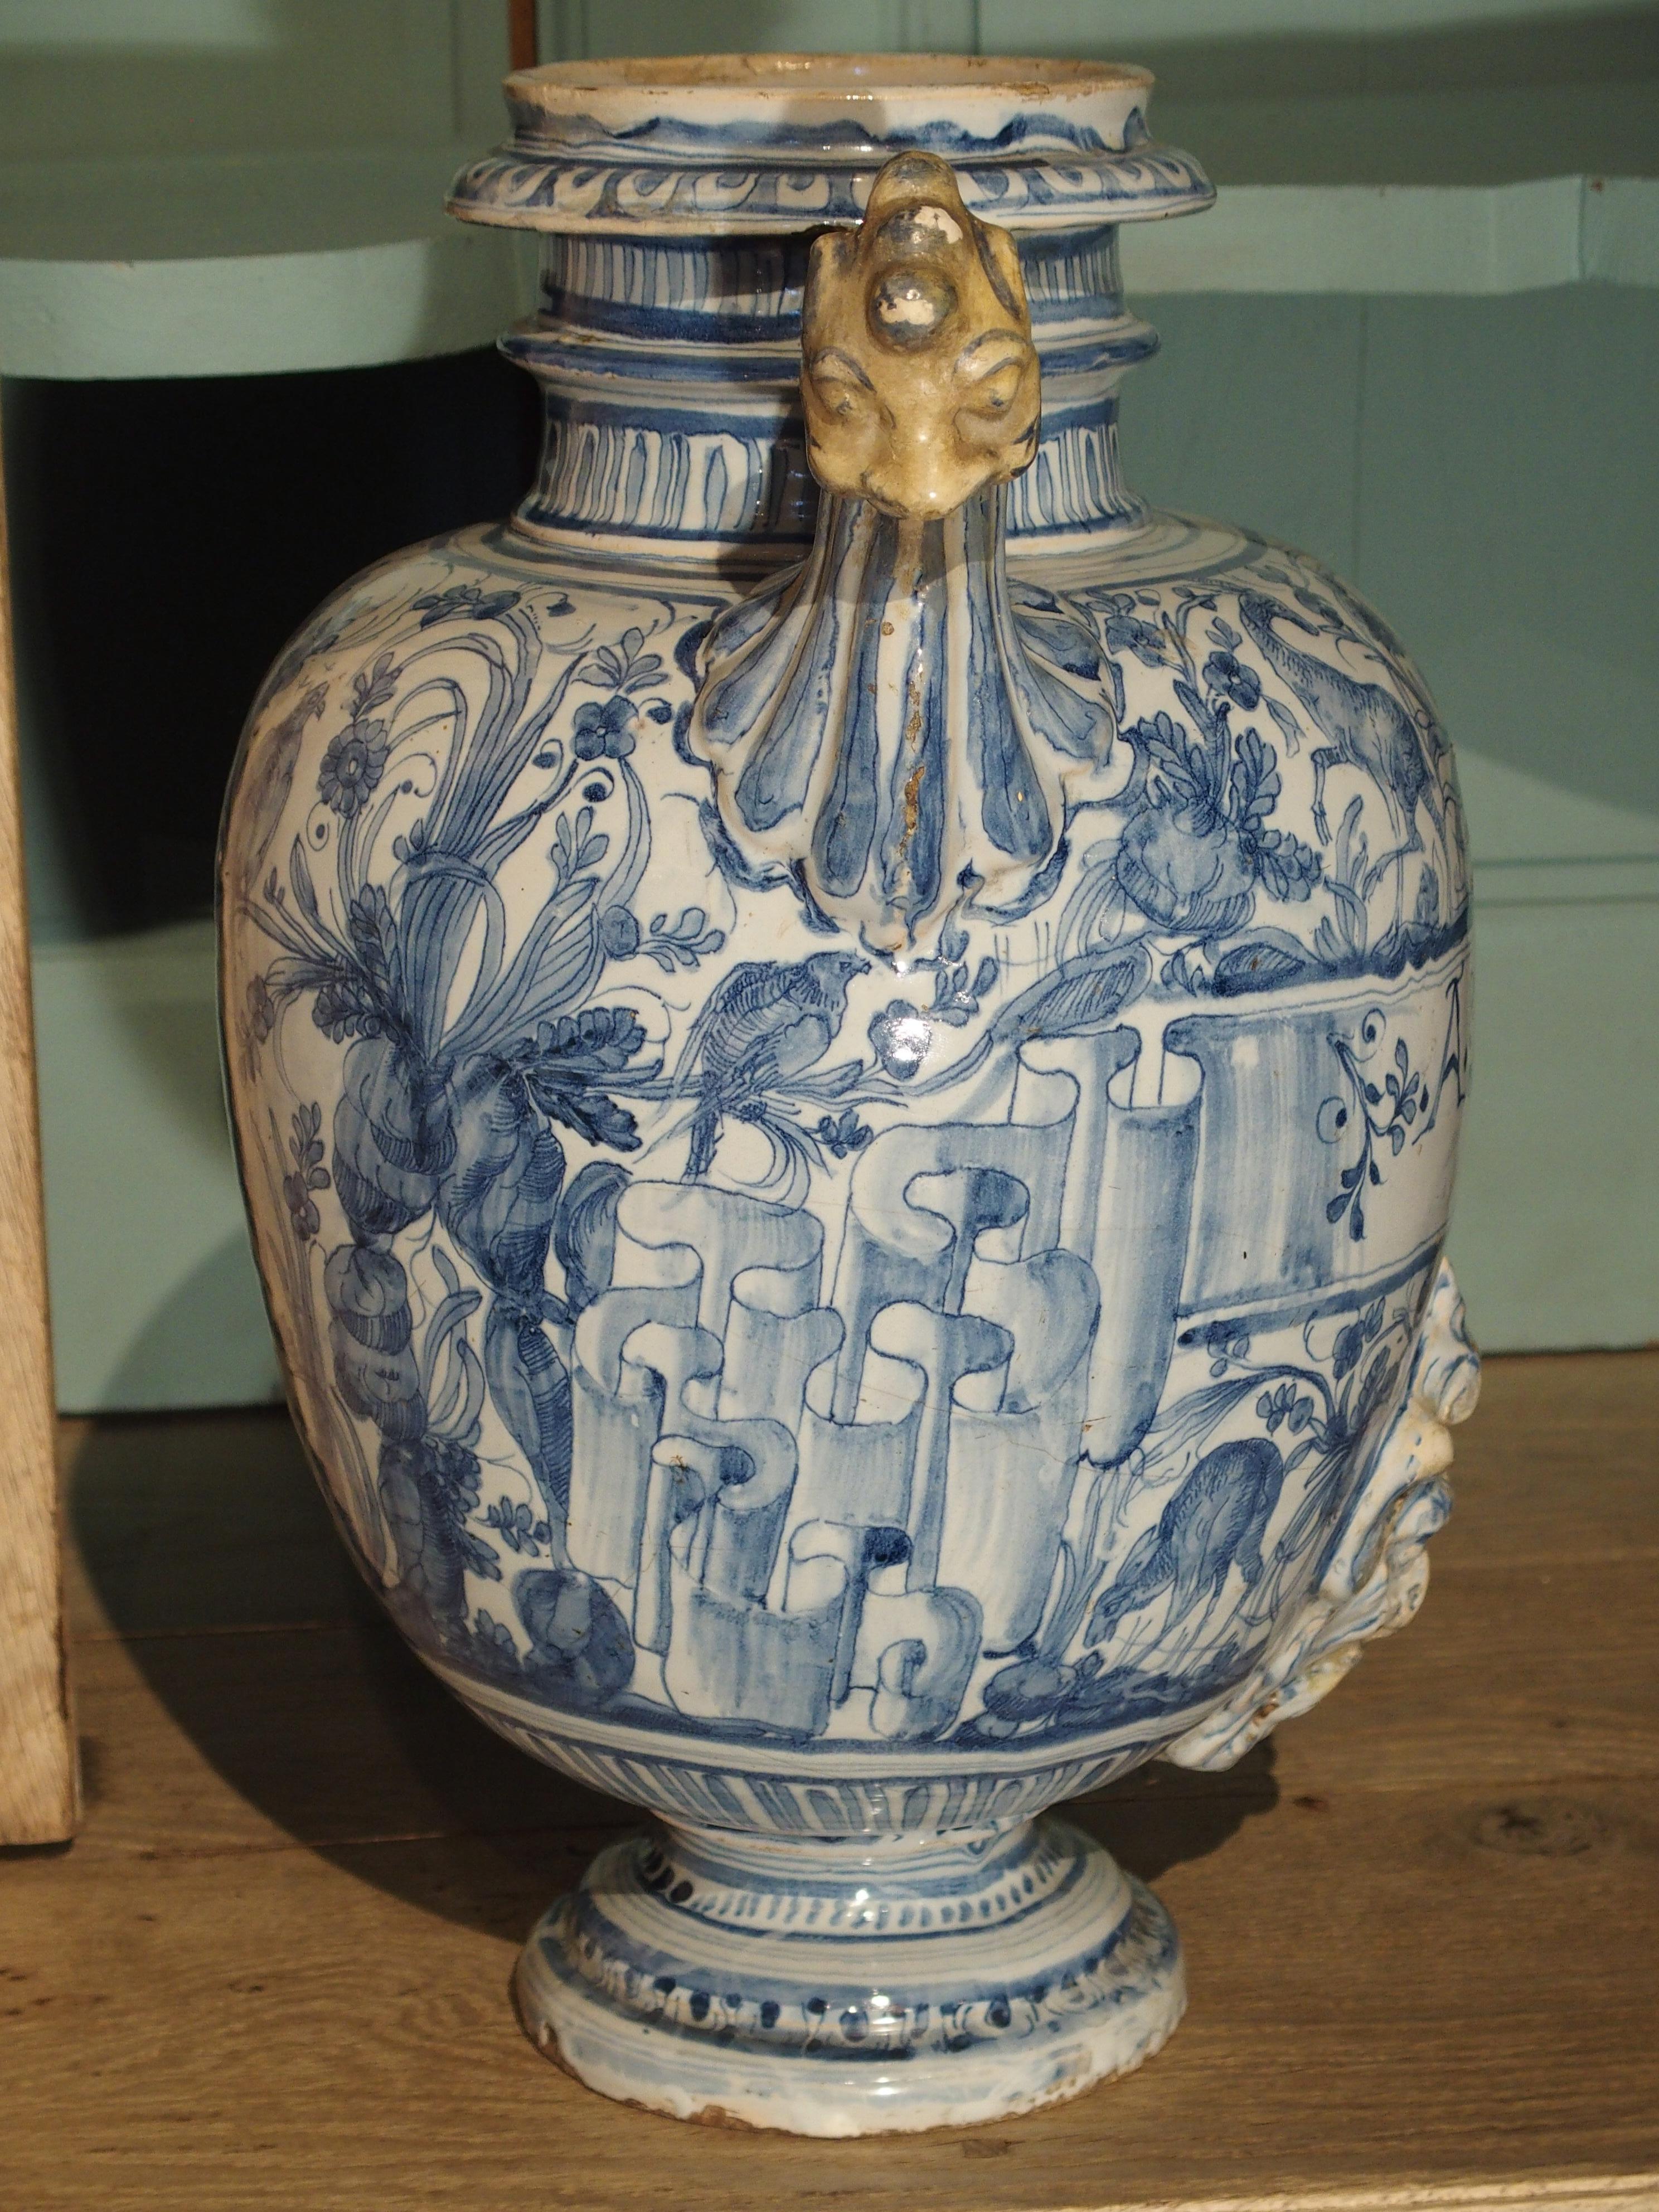 This rare antique vase was originally a fountain body which dispensed the liquid from the the large mascaron face at the bottom center. The blue star marking on the bottom tell us it's originally from the Northwestern Italian region of Liguria,